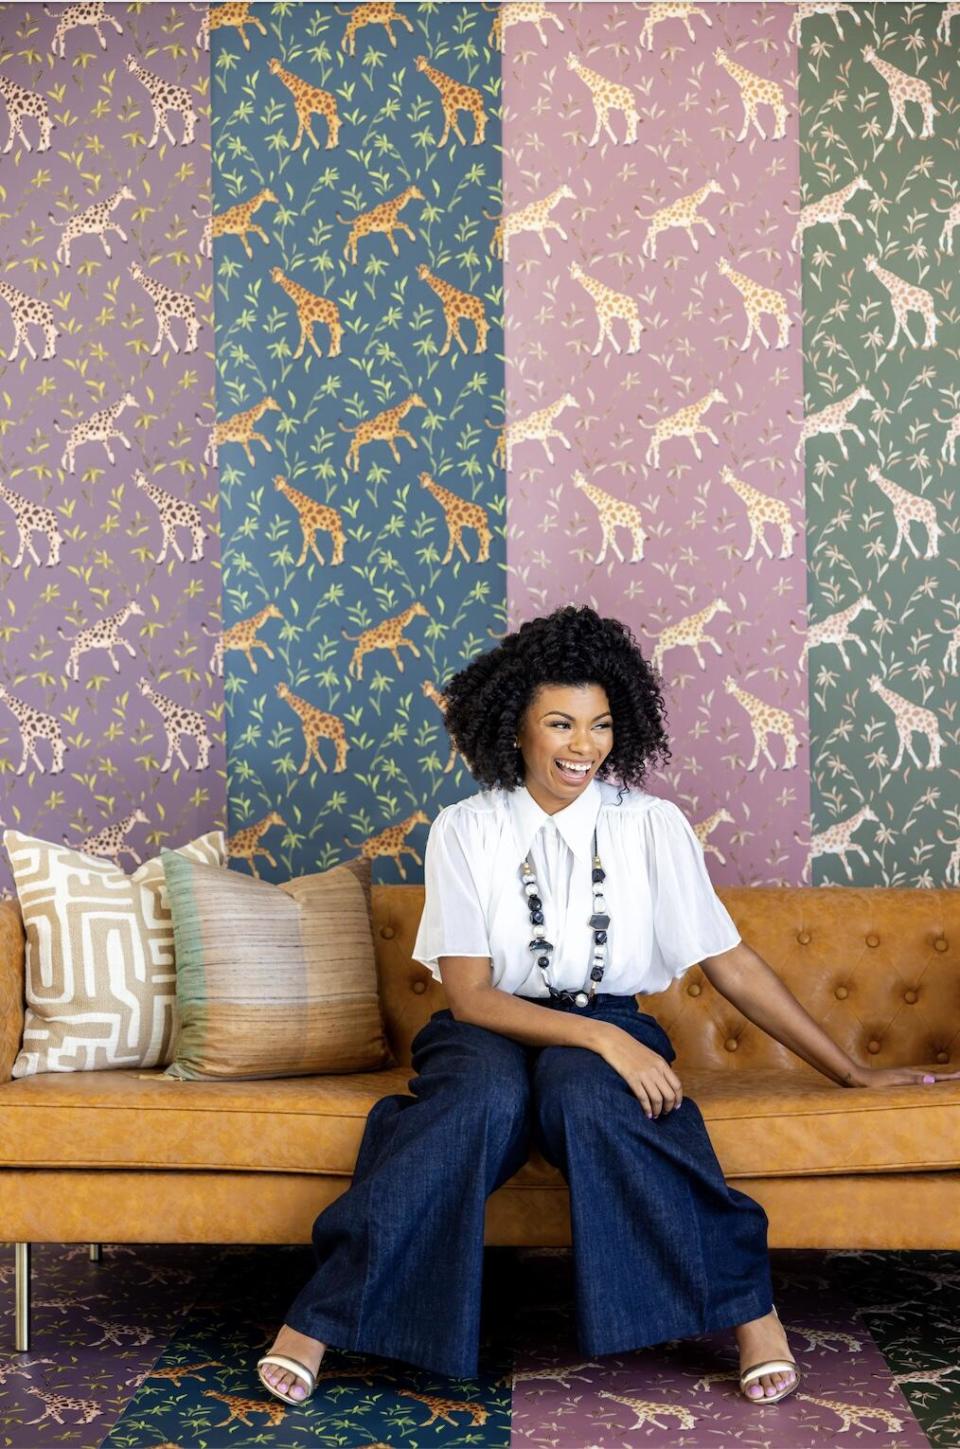 Amber Guyton and Mitchell Black teamed up for the Atlanta designer’s first-ever wallpaper collection